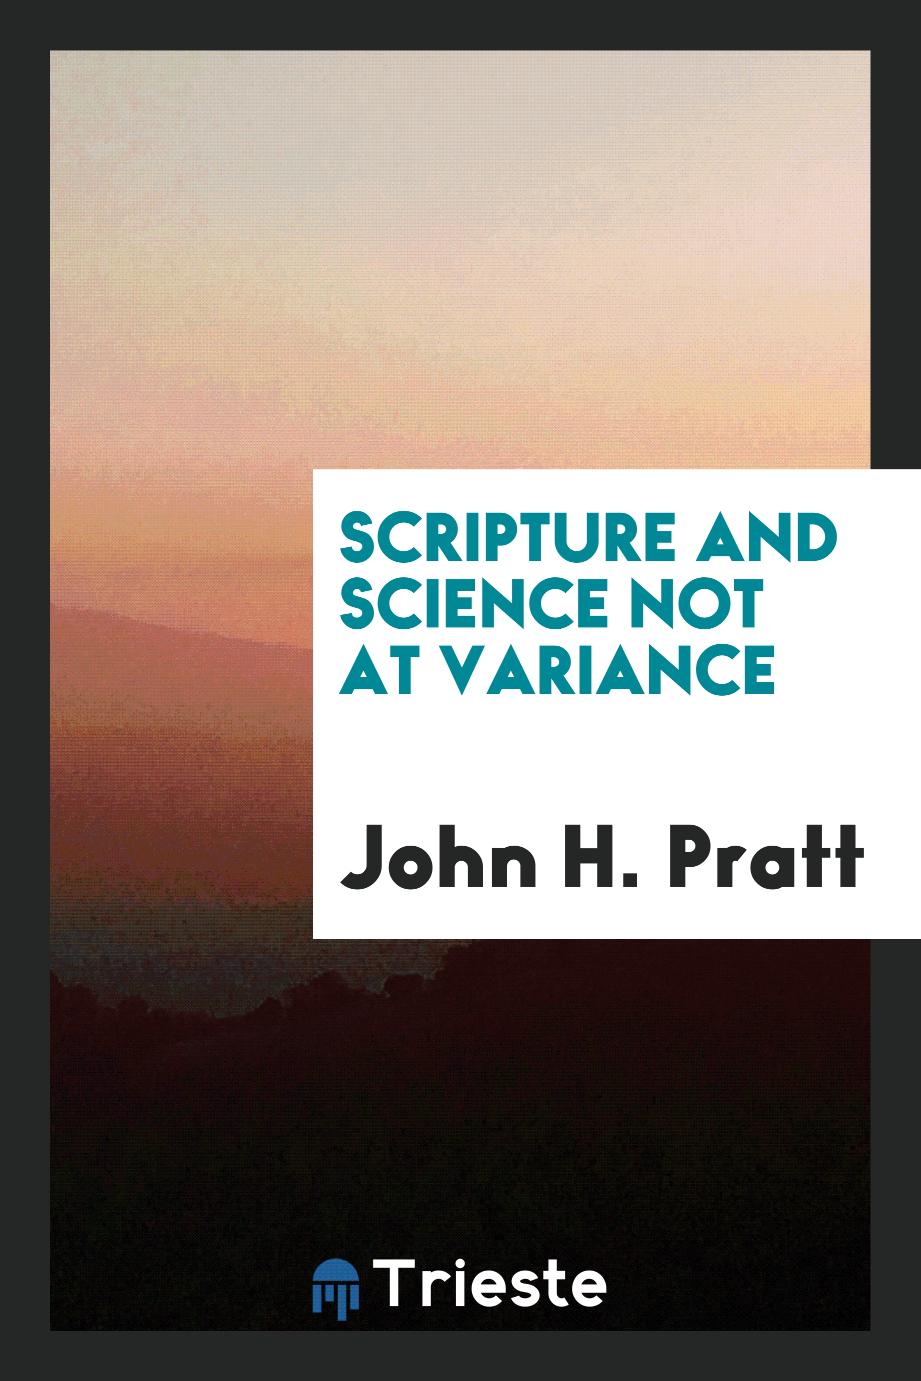 Scripture and science not at variance